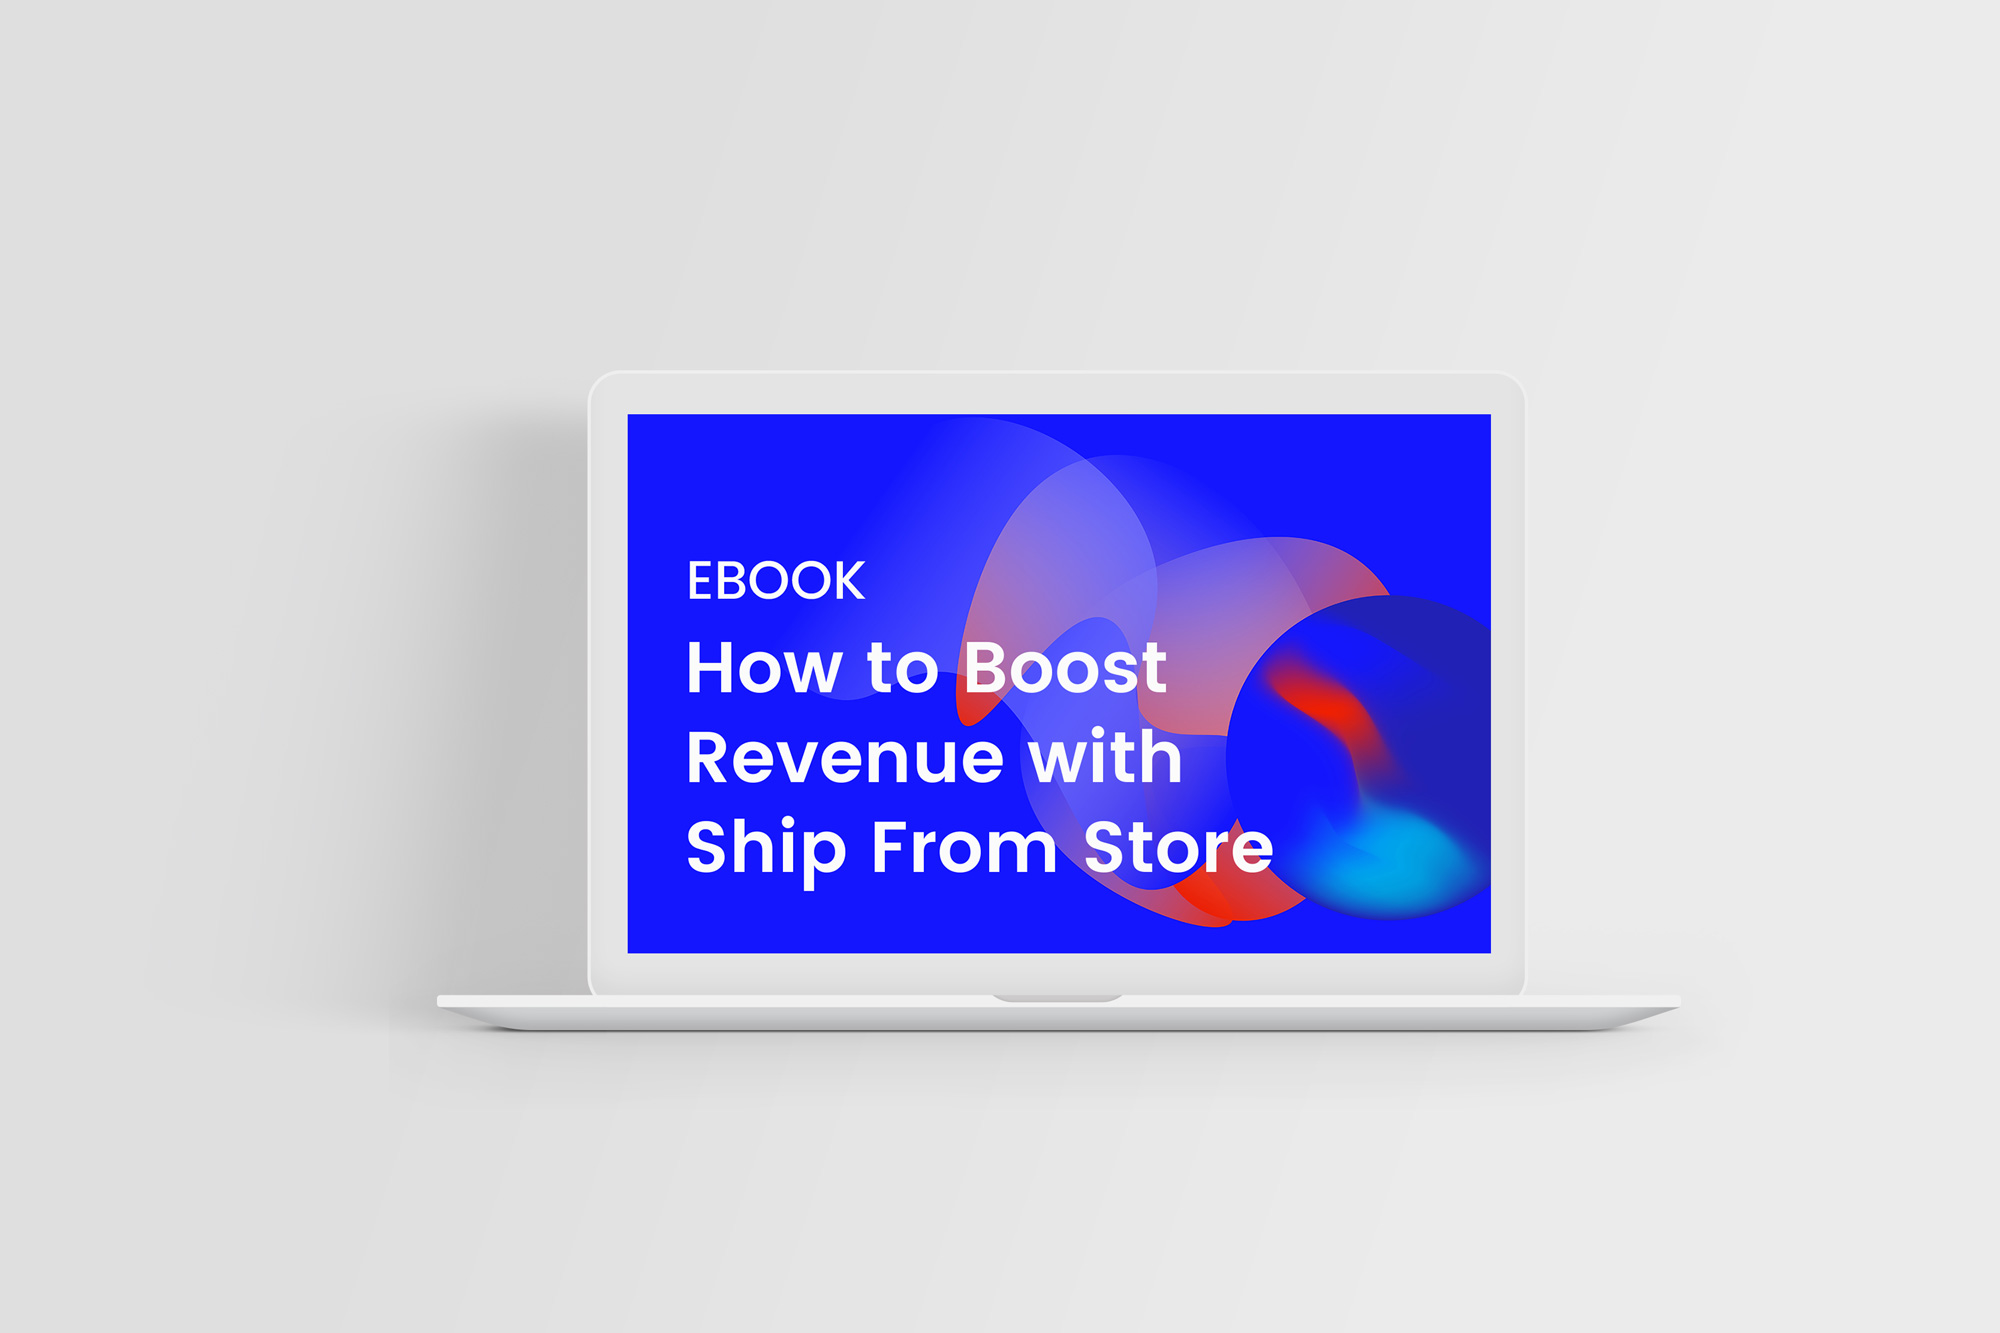 Boost Revenue with Ship from Store